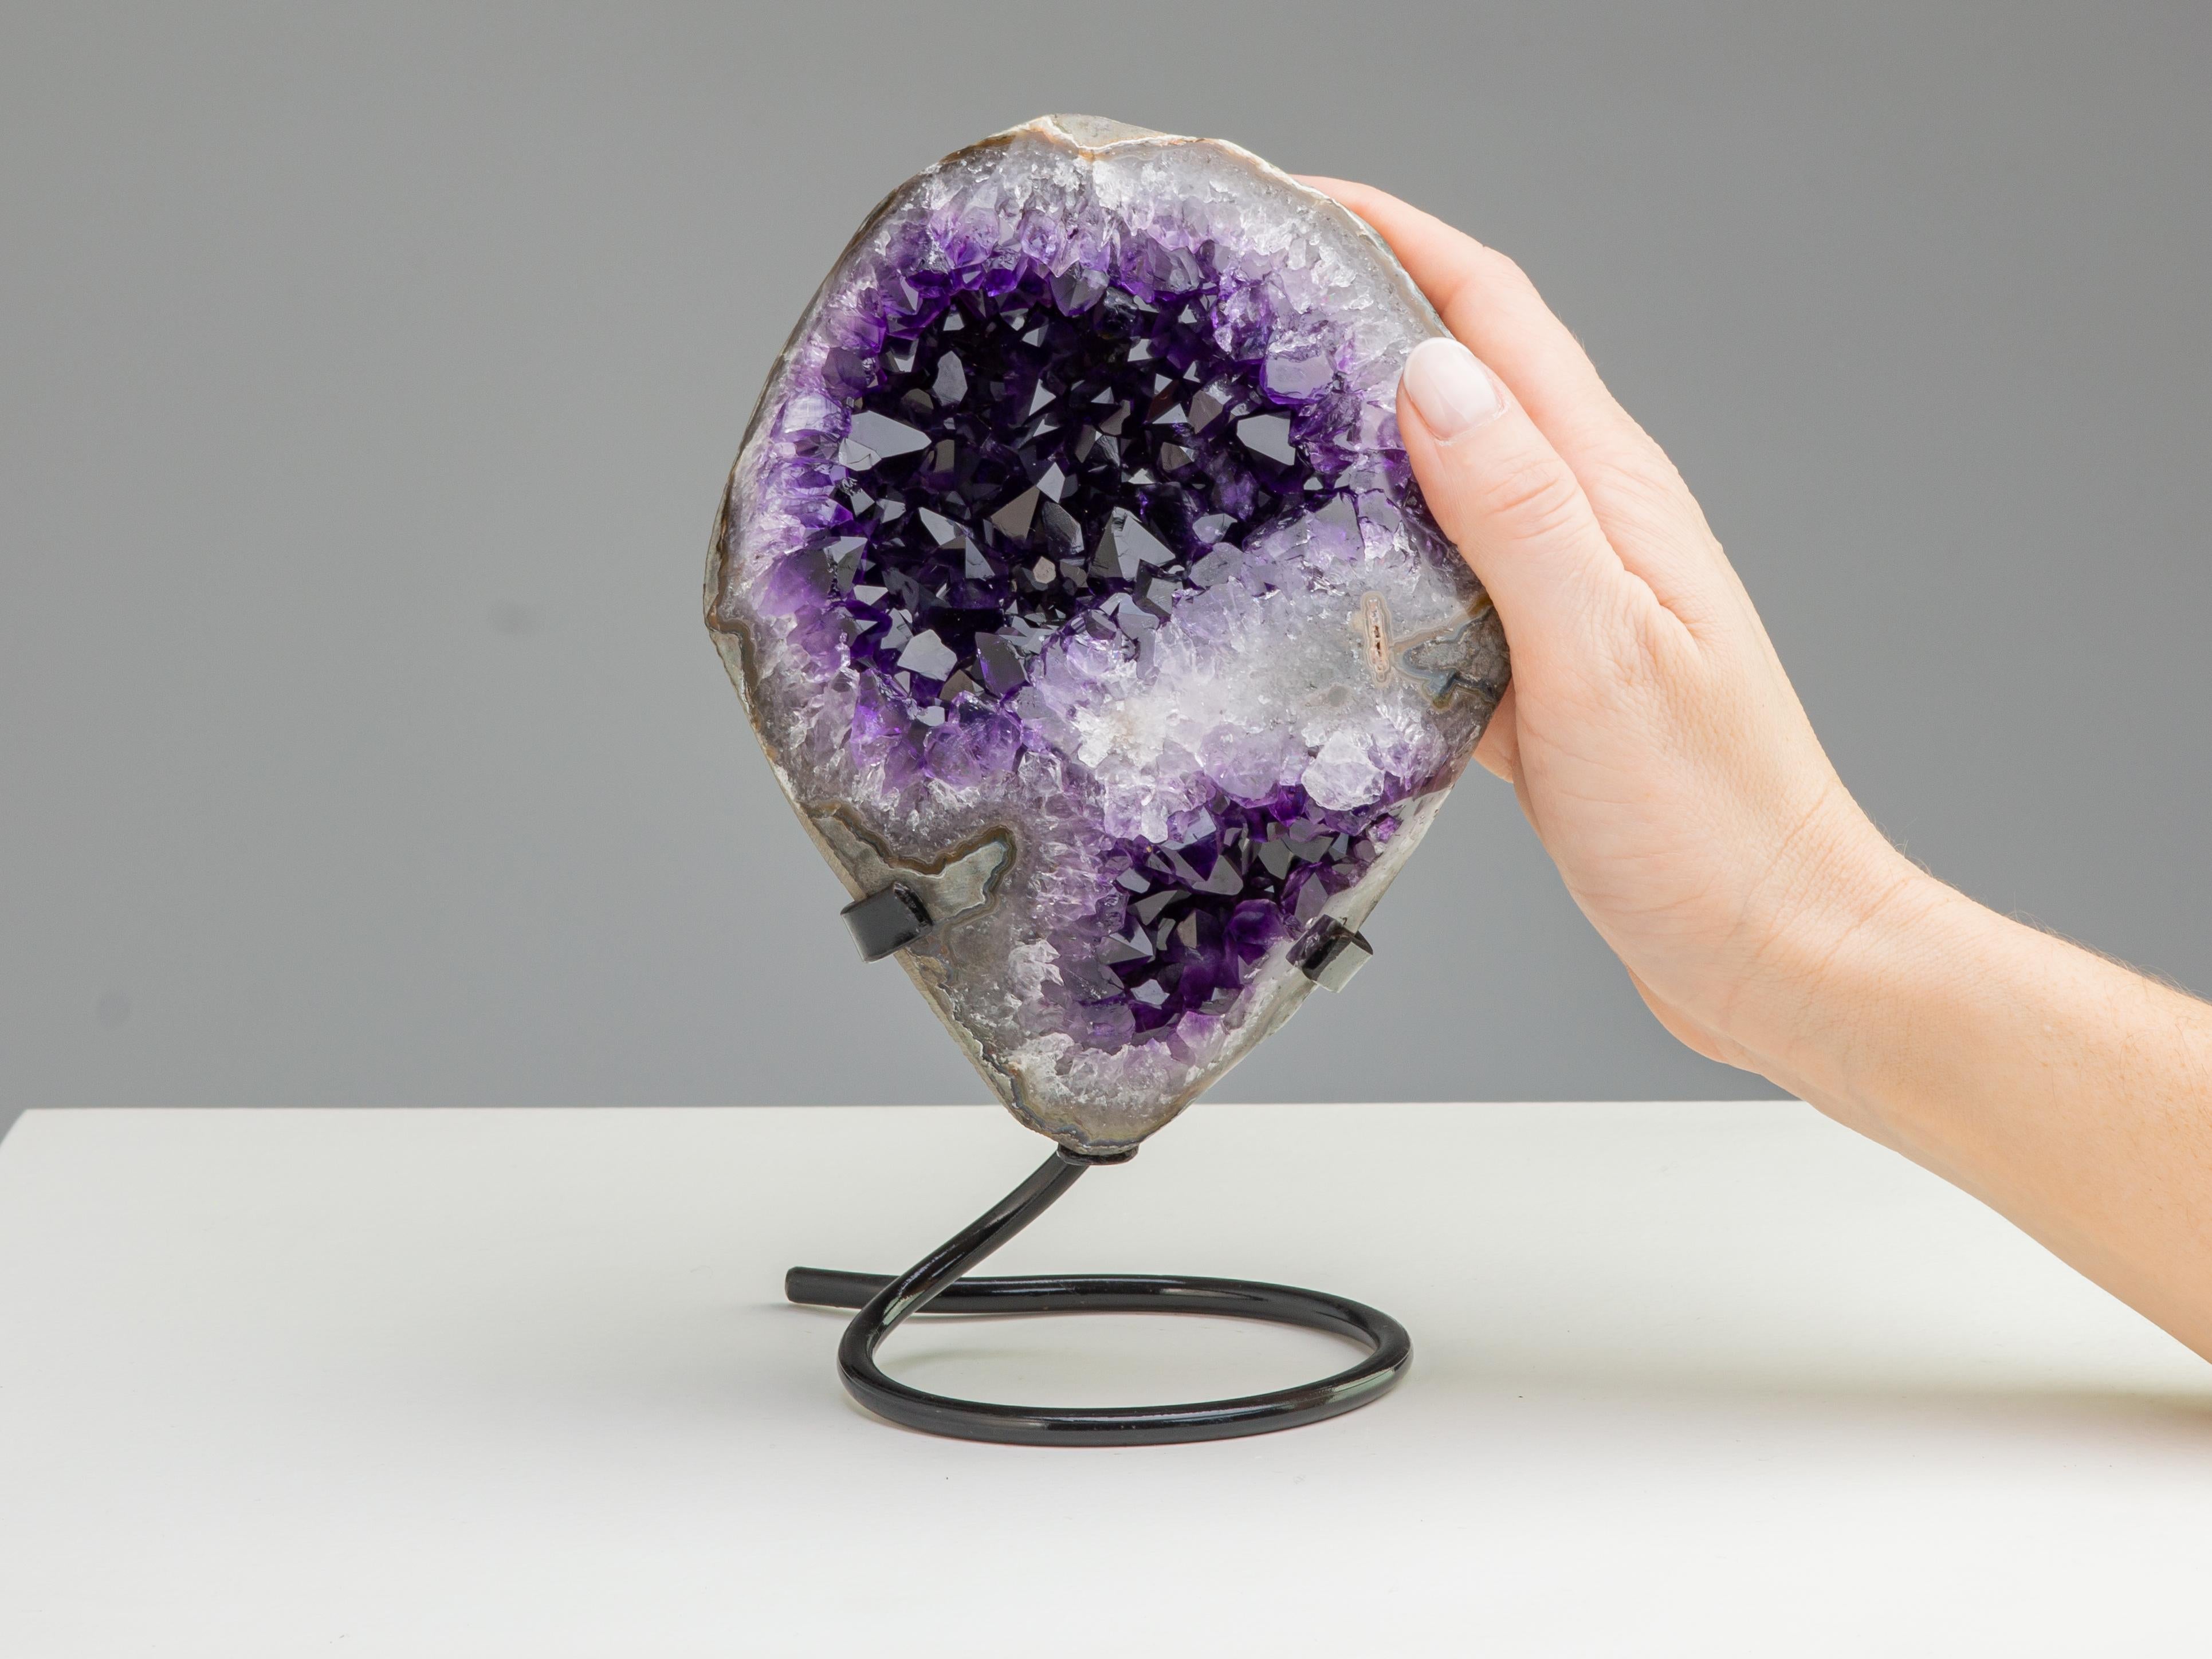 This small oval shaped formation has particularly deep purple, large amethyst crystals separated by a streak of white quartz, exposed from a tangentially cut and polished stalactite.

This piece was legally and ethically sourced directly in the